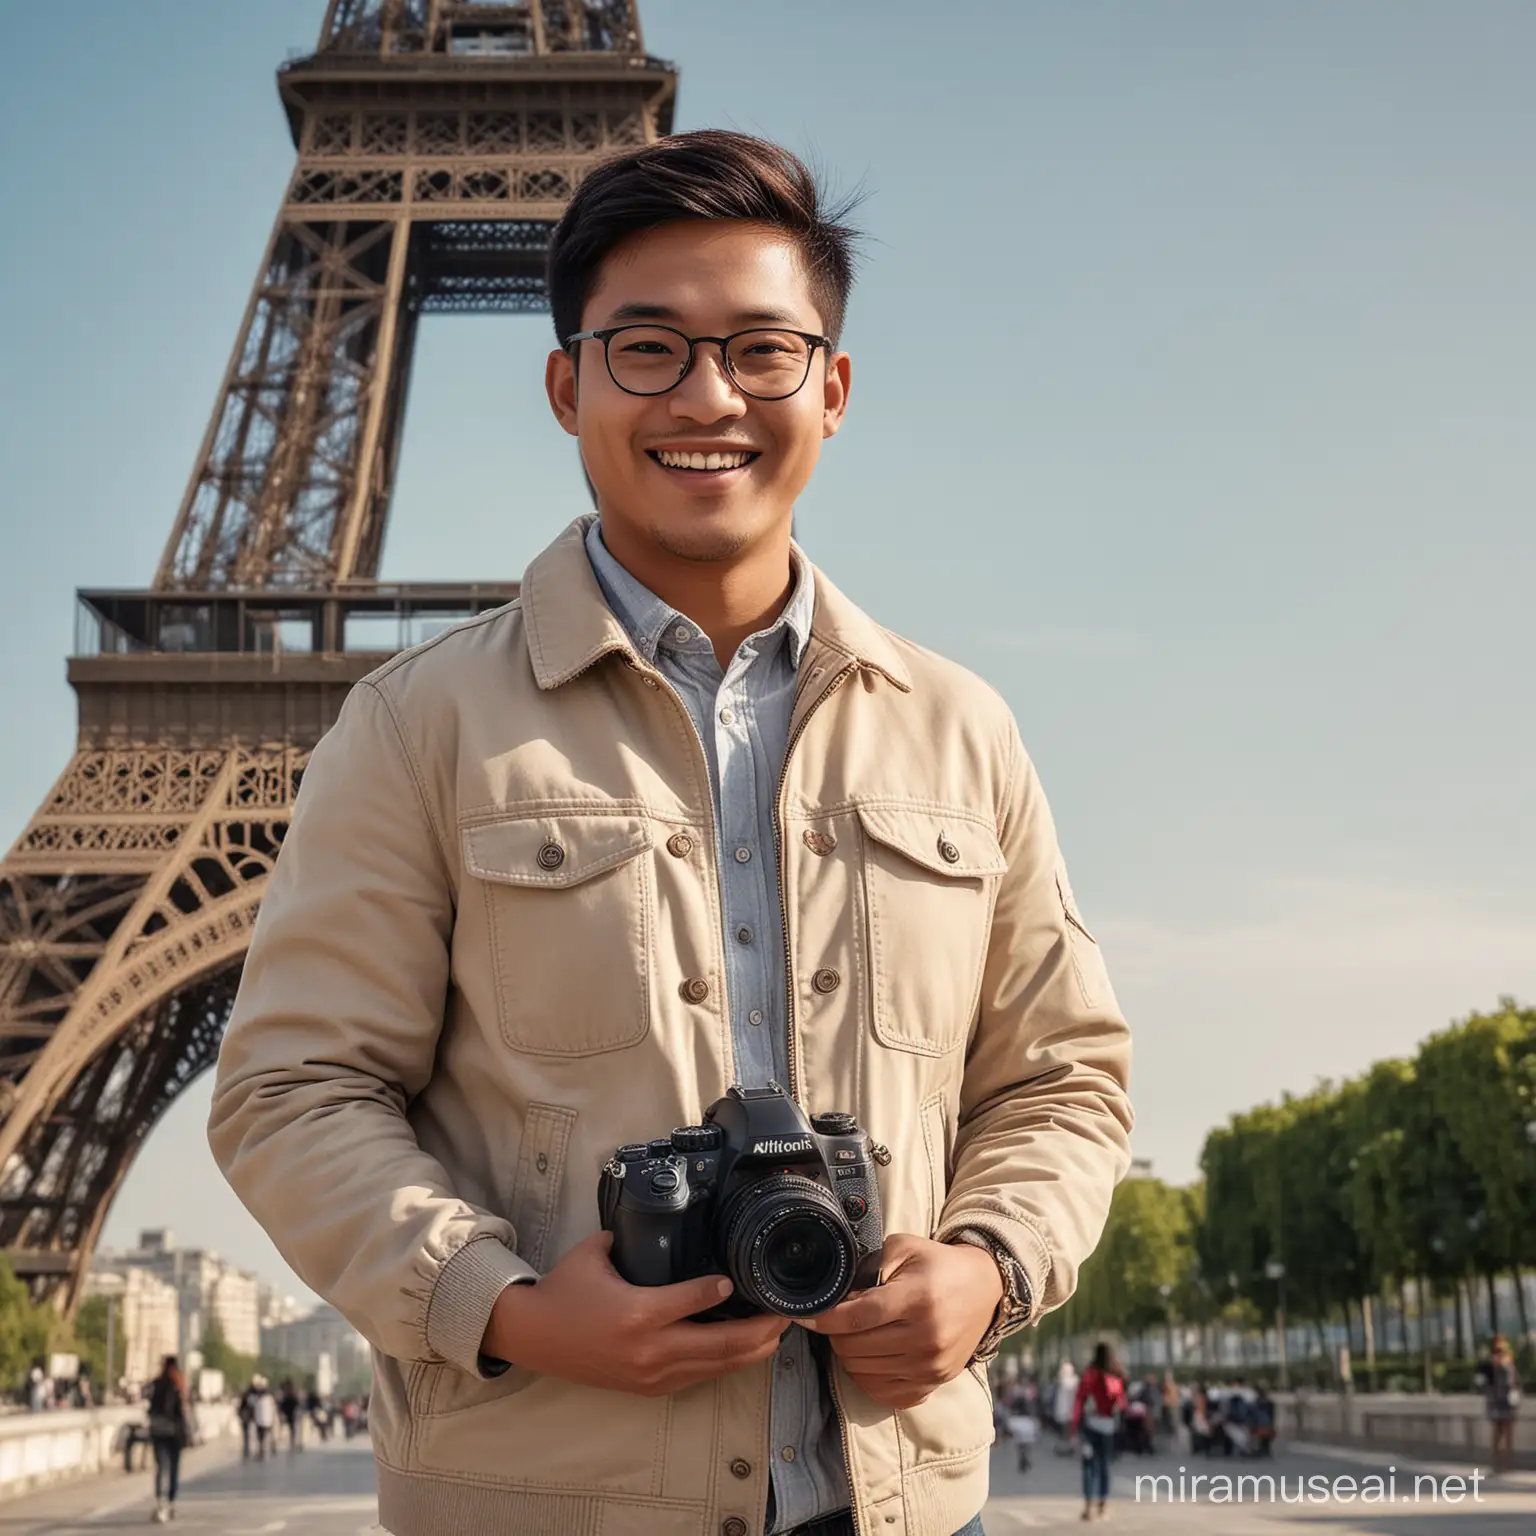 Professional photograph, Indonesian man 26 year old, smile, short straight hair style, round face, detailed faces, glasses, chubby, weight 80 kg, holding dslr camera, full body, wearing casual jacket and outdoor shoe, adventure, outdoor, background eiffel tower,sunny day, body facing forward, UHD.